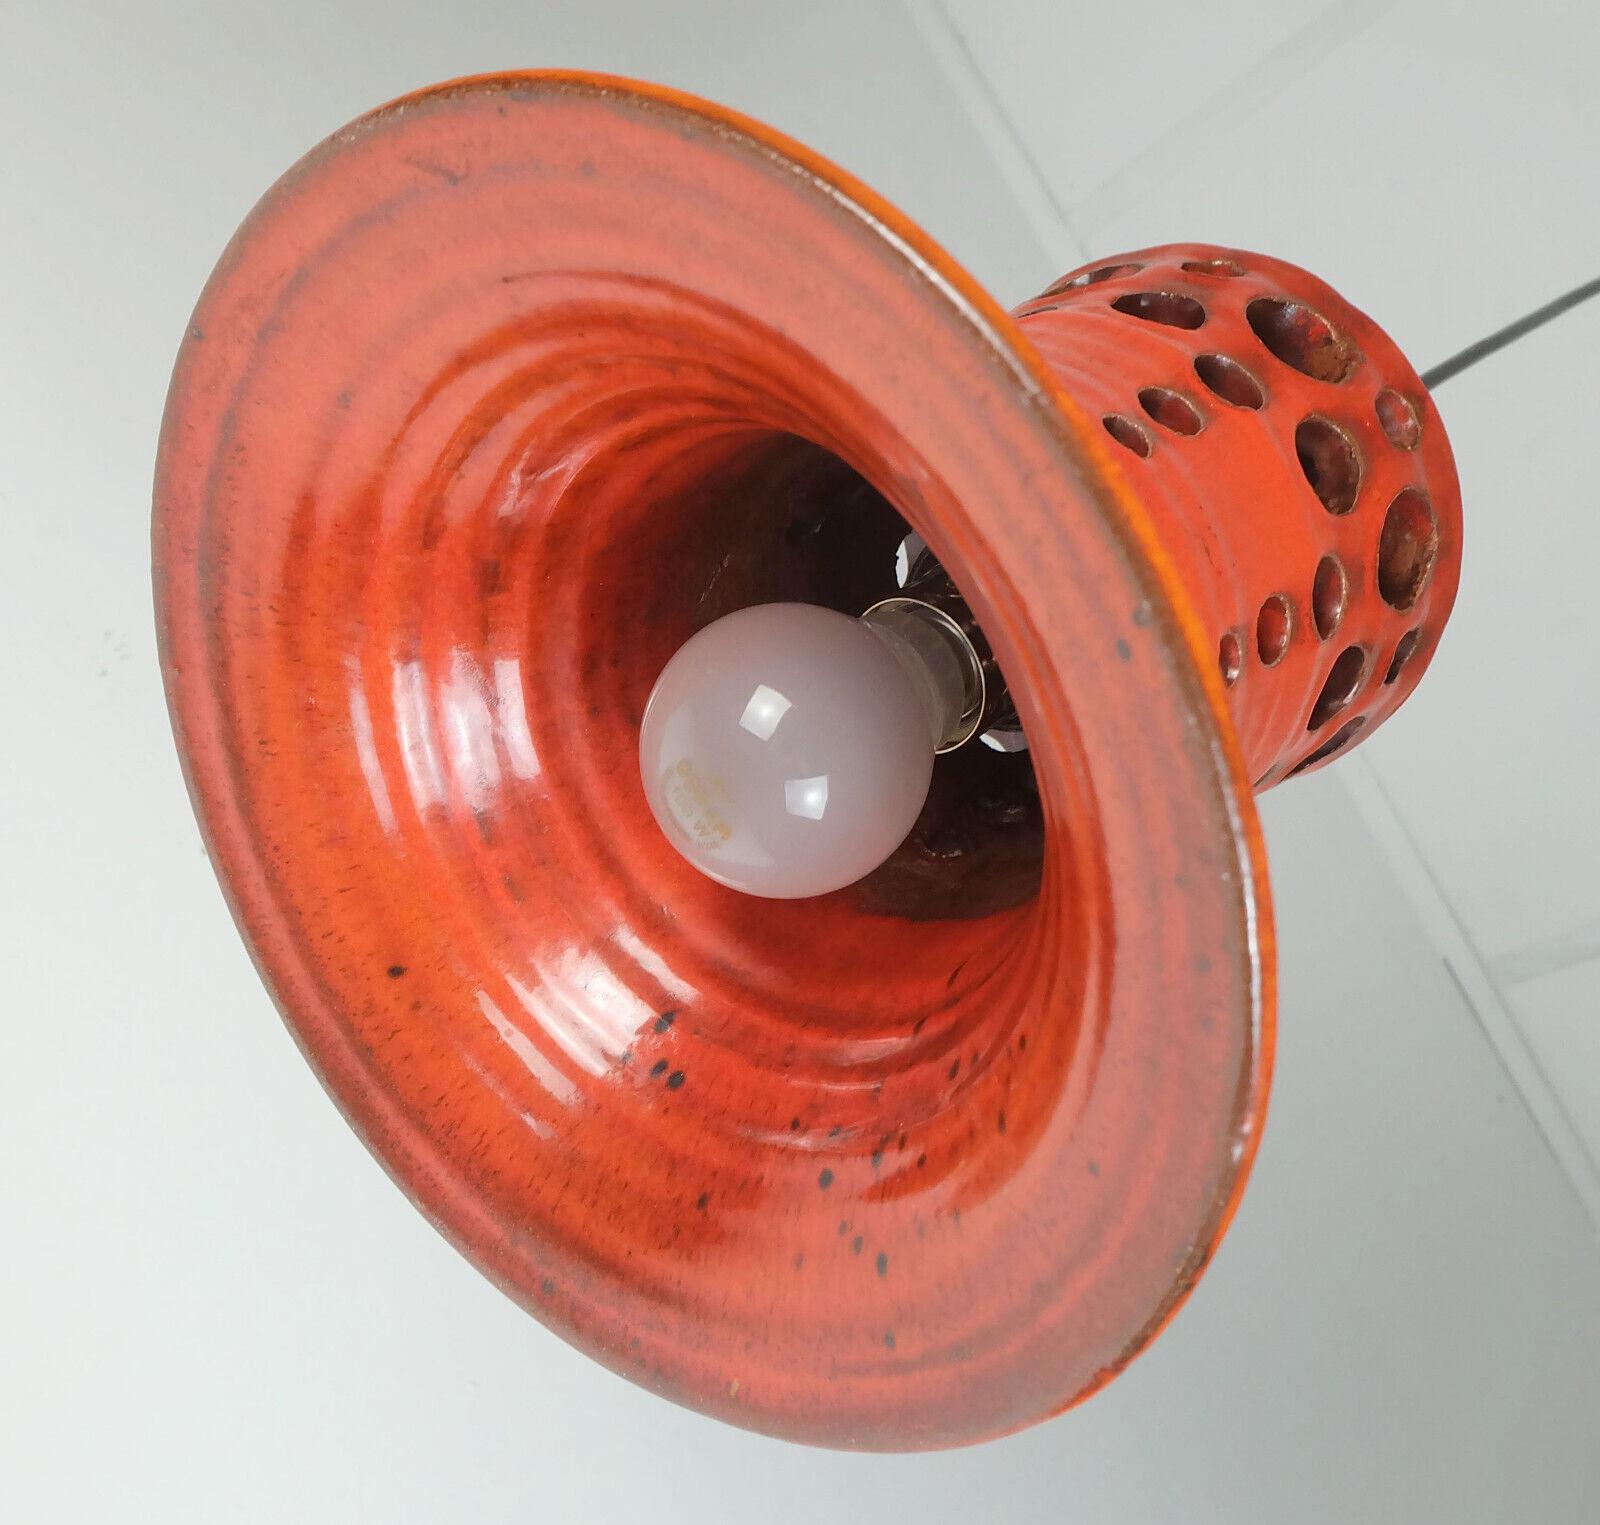 Very beautiful 1970s pendant light. The shade is made of orange glazed ceramic with some red and black. The hole structure creates an interesting light effect and a cozy atmosphere. Black electric wire and black canopy. Holds 1 E27 light